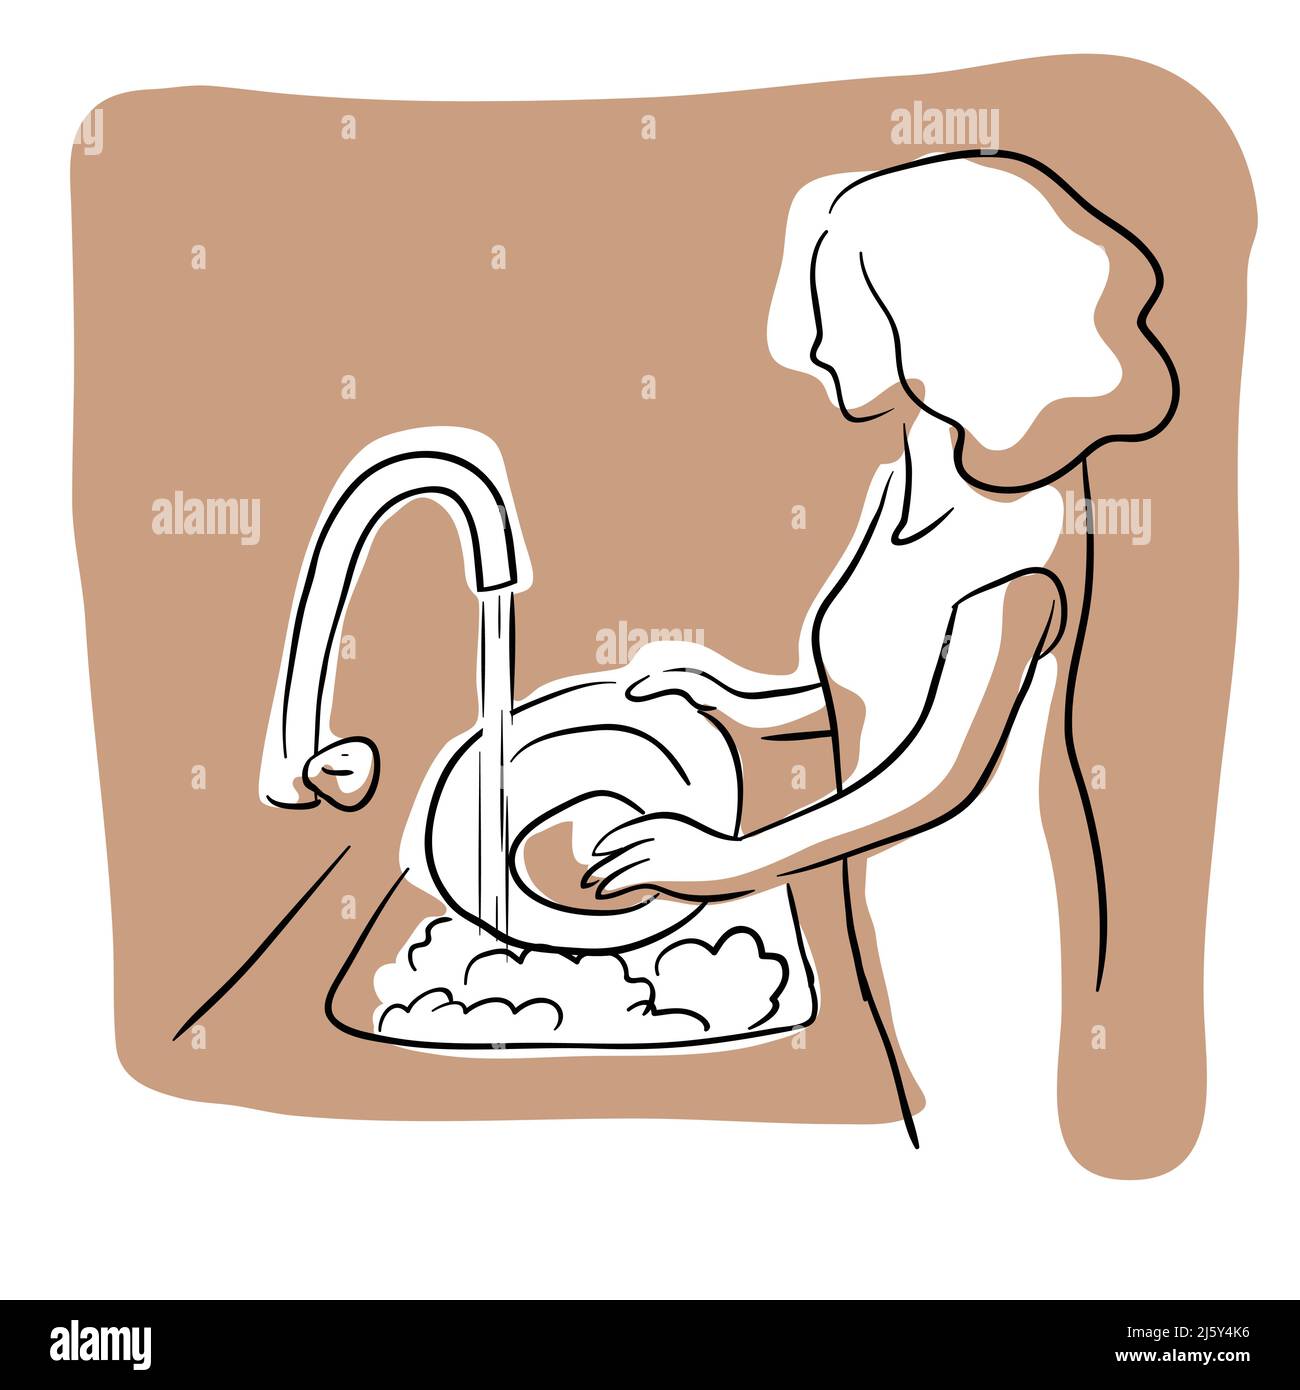 Woman washing dishes line art vector illustration Stock Vector